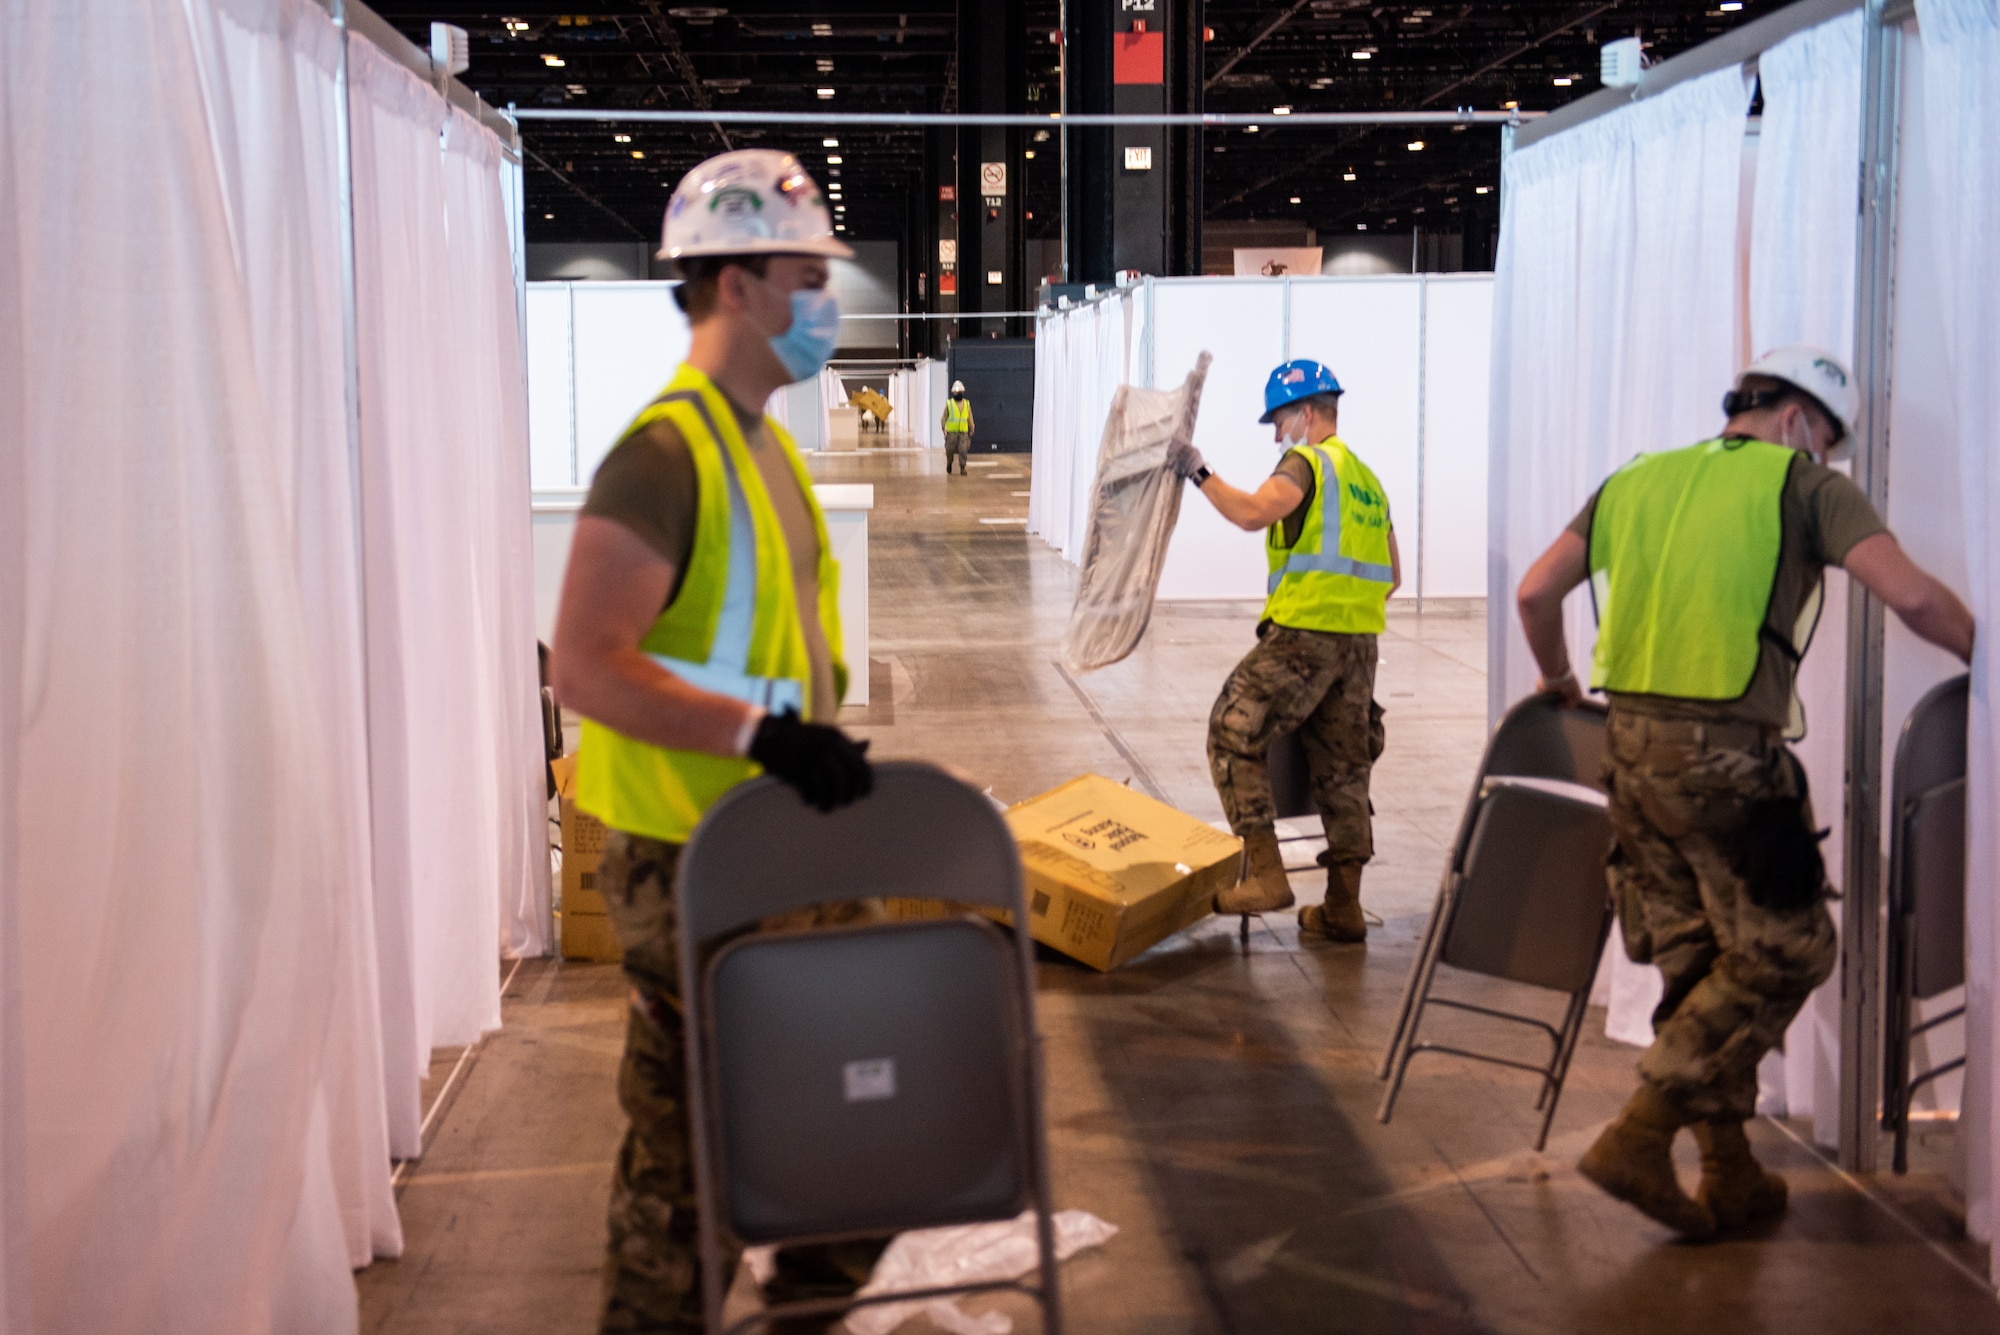 Members of the Illinois Air National Guard assemble an alternate care facility at the McCormick Place Convention Center in Chicago April 8, 2020. Sixty Guard members were activated to support the US Army Corps of Engineers and the Federal Emergency Management Agency to set up the facility for COVID-19 patients with mild symptoms who do not require intensive care.